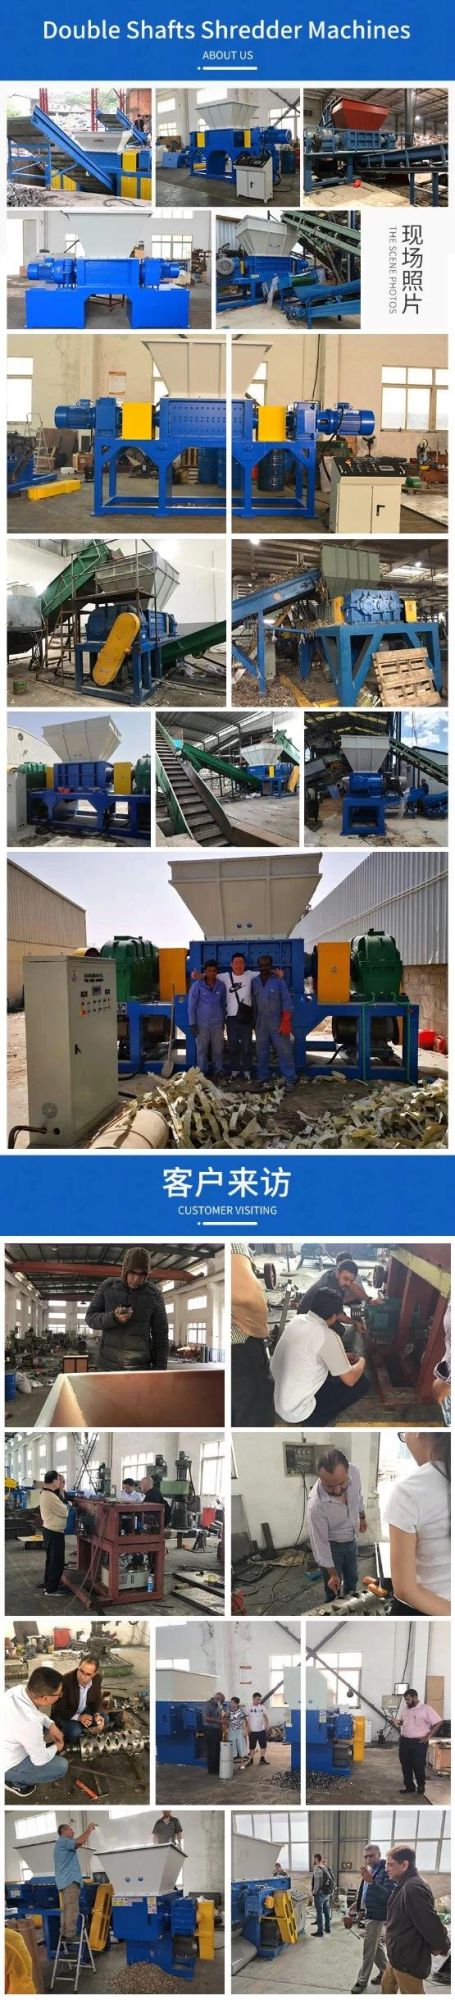 Polycarbonate Sheet Roll Crusher Polycarbonate Plate/Film/Board Crusher Polycarbonate Crusher